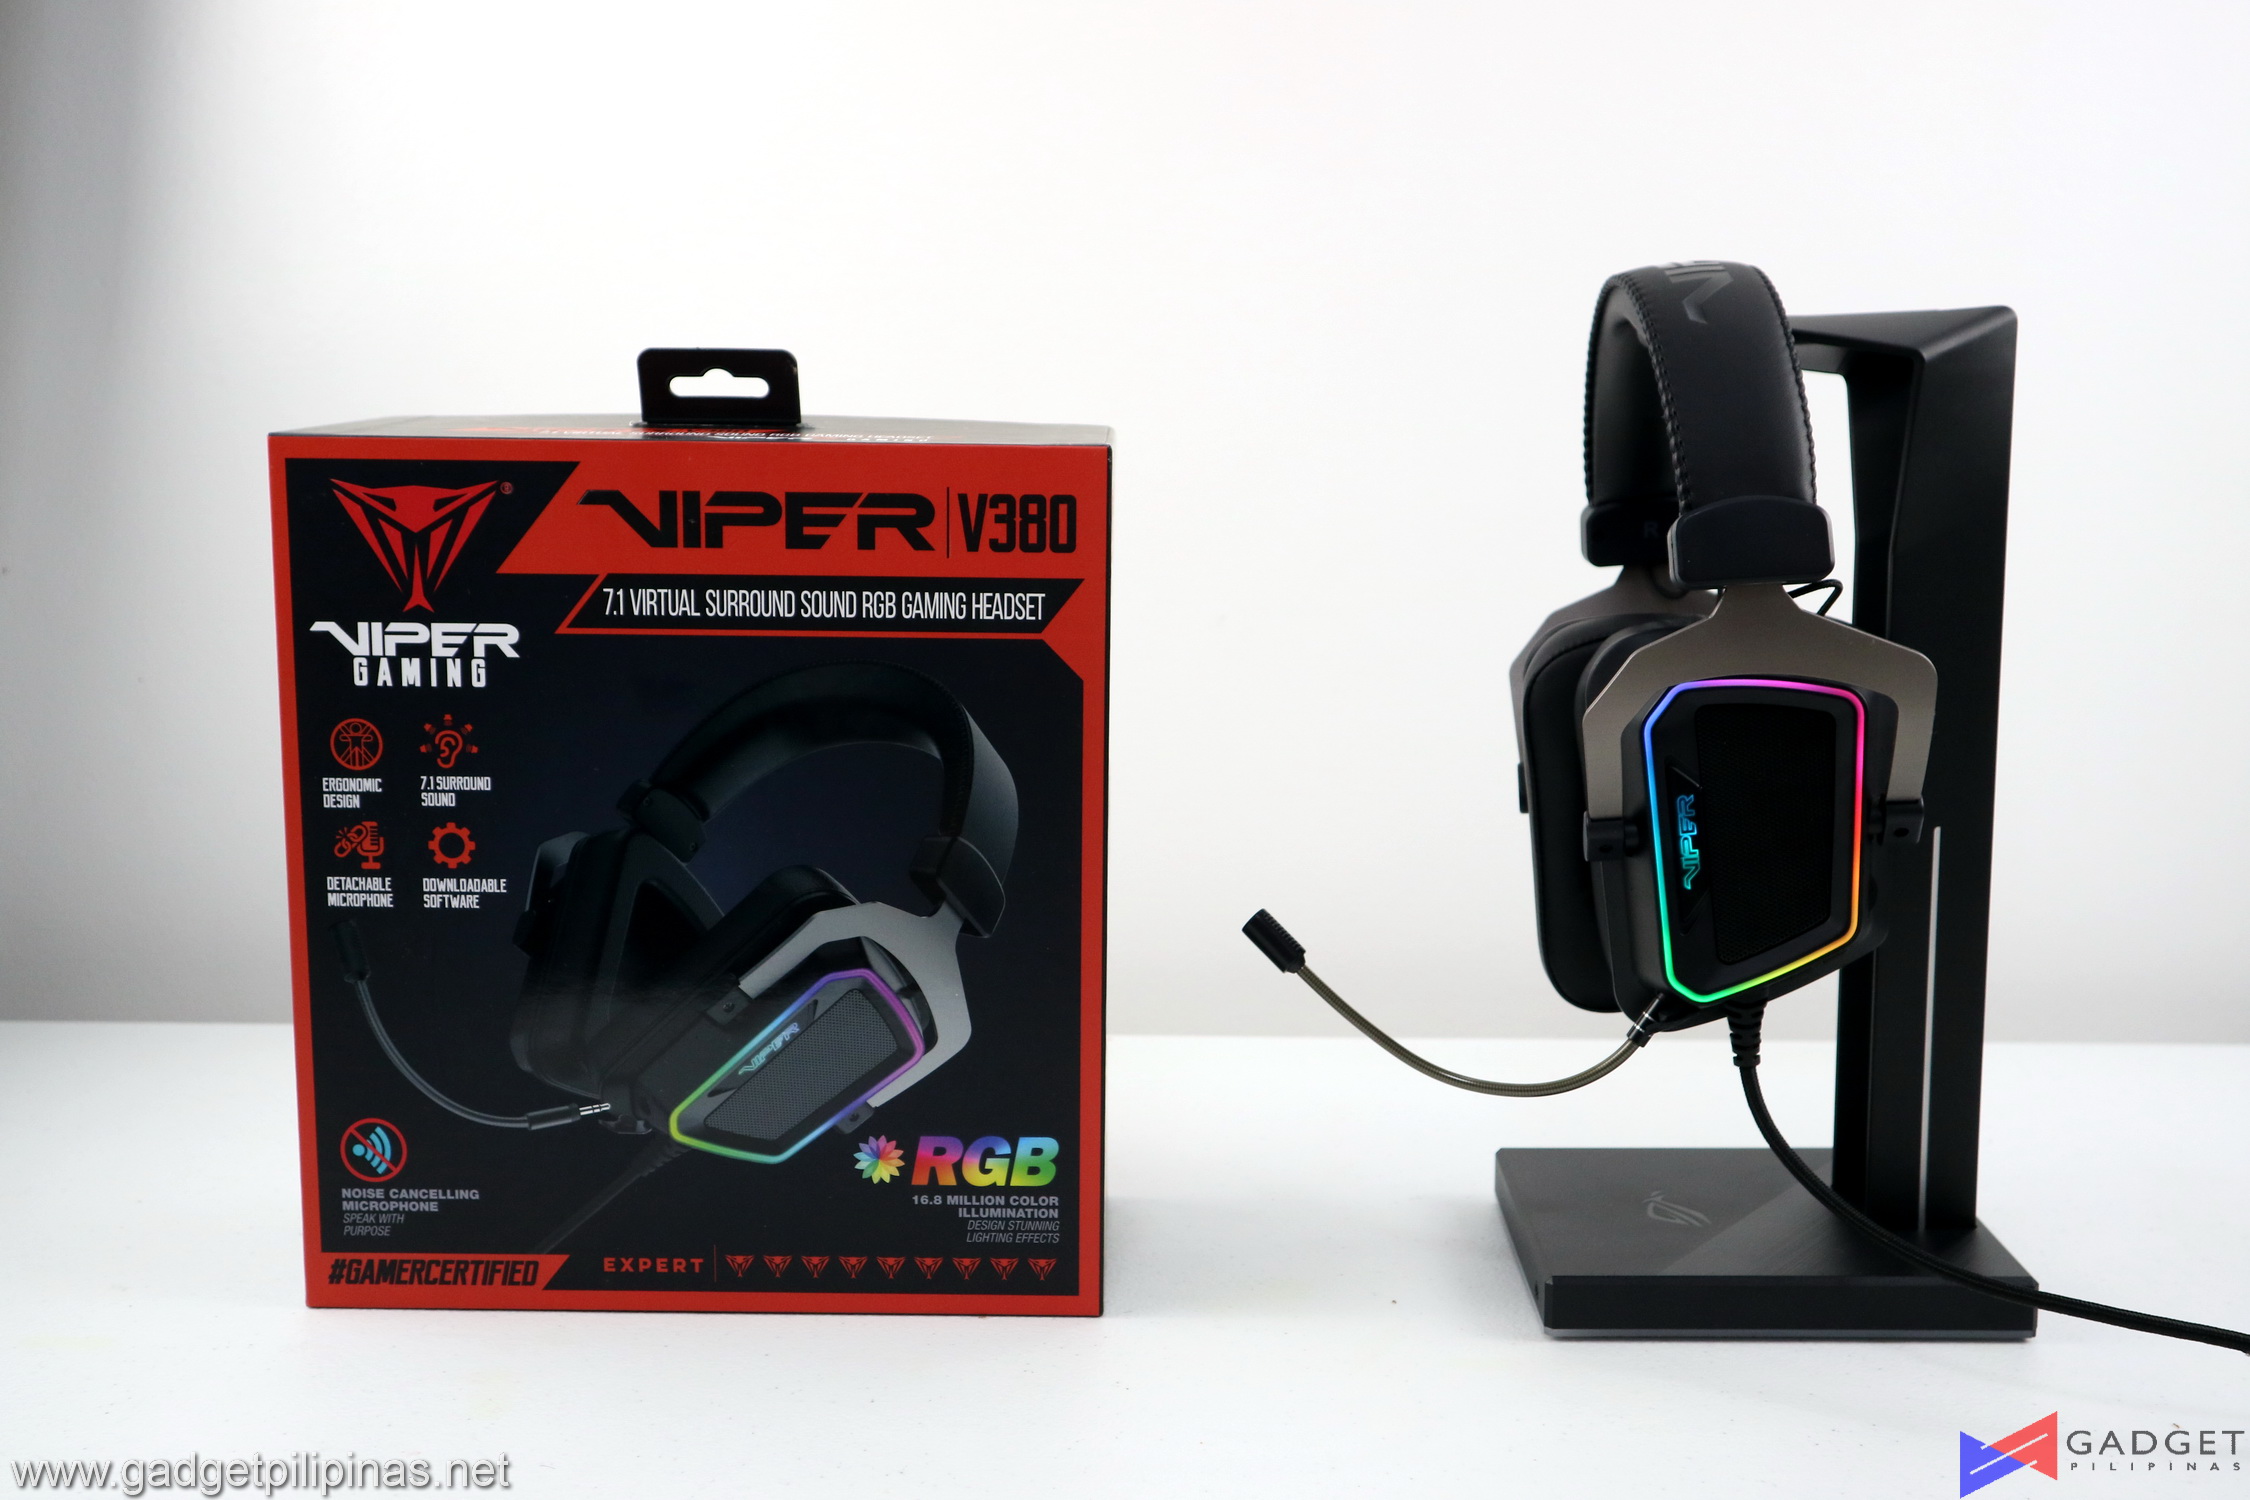 Patriot Viper V380 Gaming Headset Review – A Budget Friendly Option You Shouldn’t Ignore